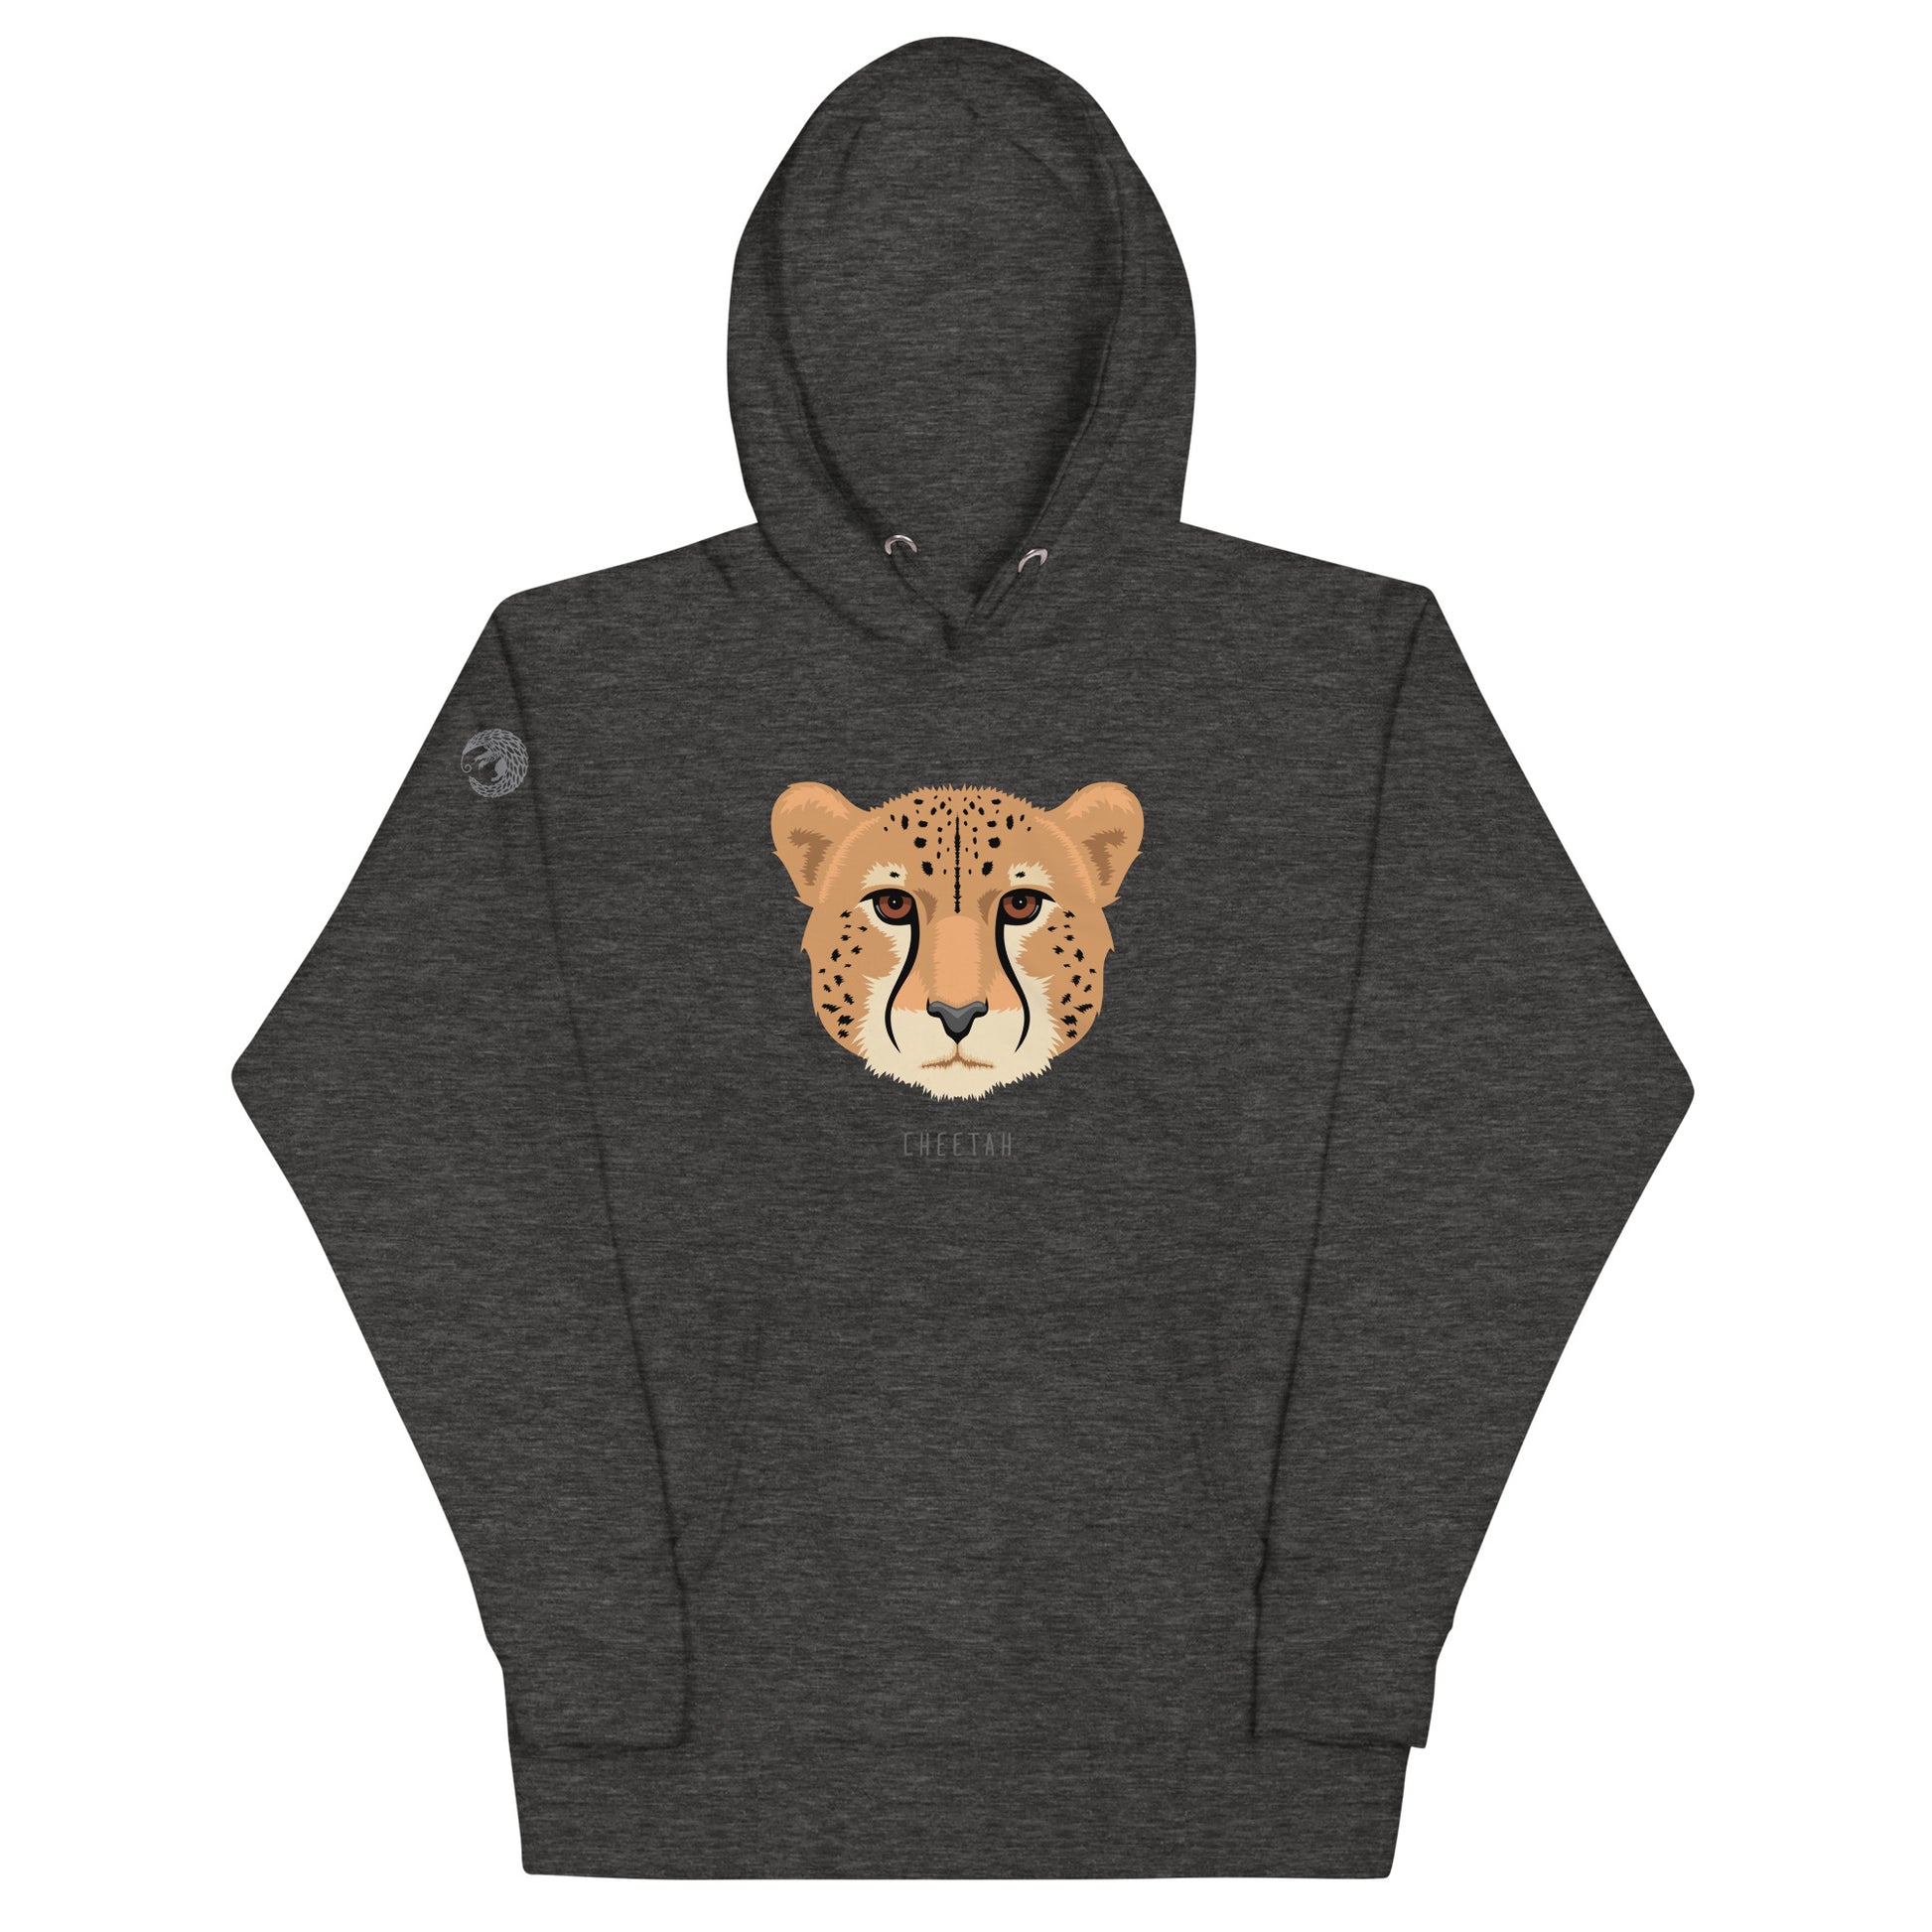 A grey heather, hooded, pullover sweatshirt with an illustration of a cheetah's face and thew world "cheetah" beneath it. 